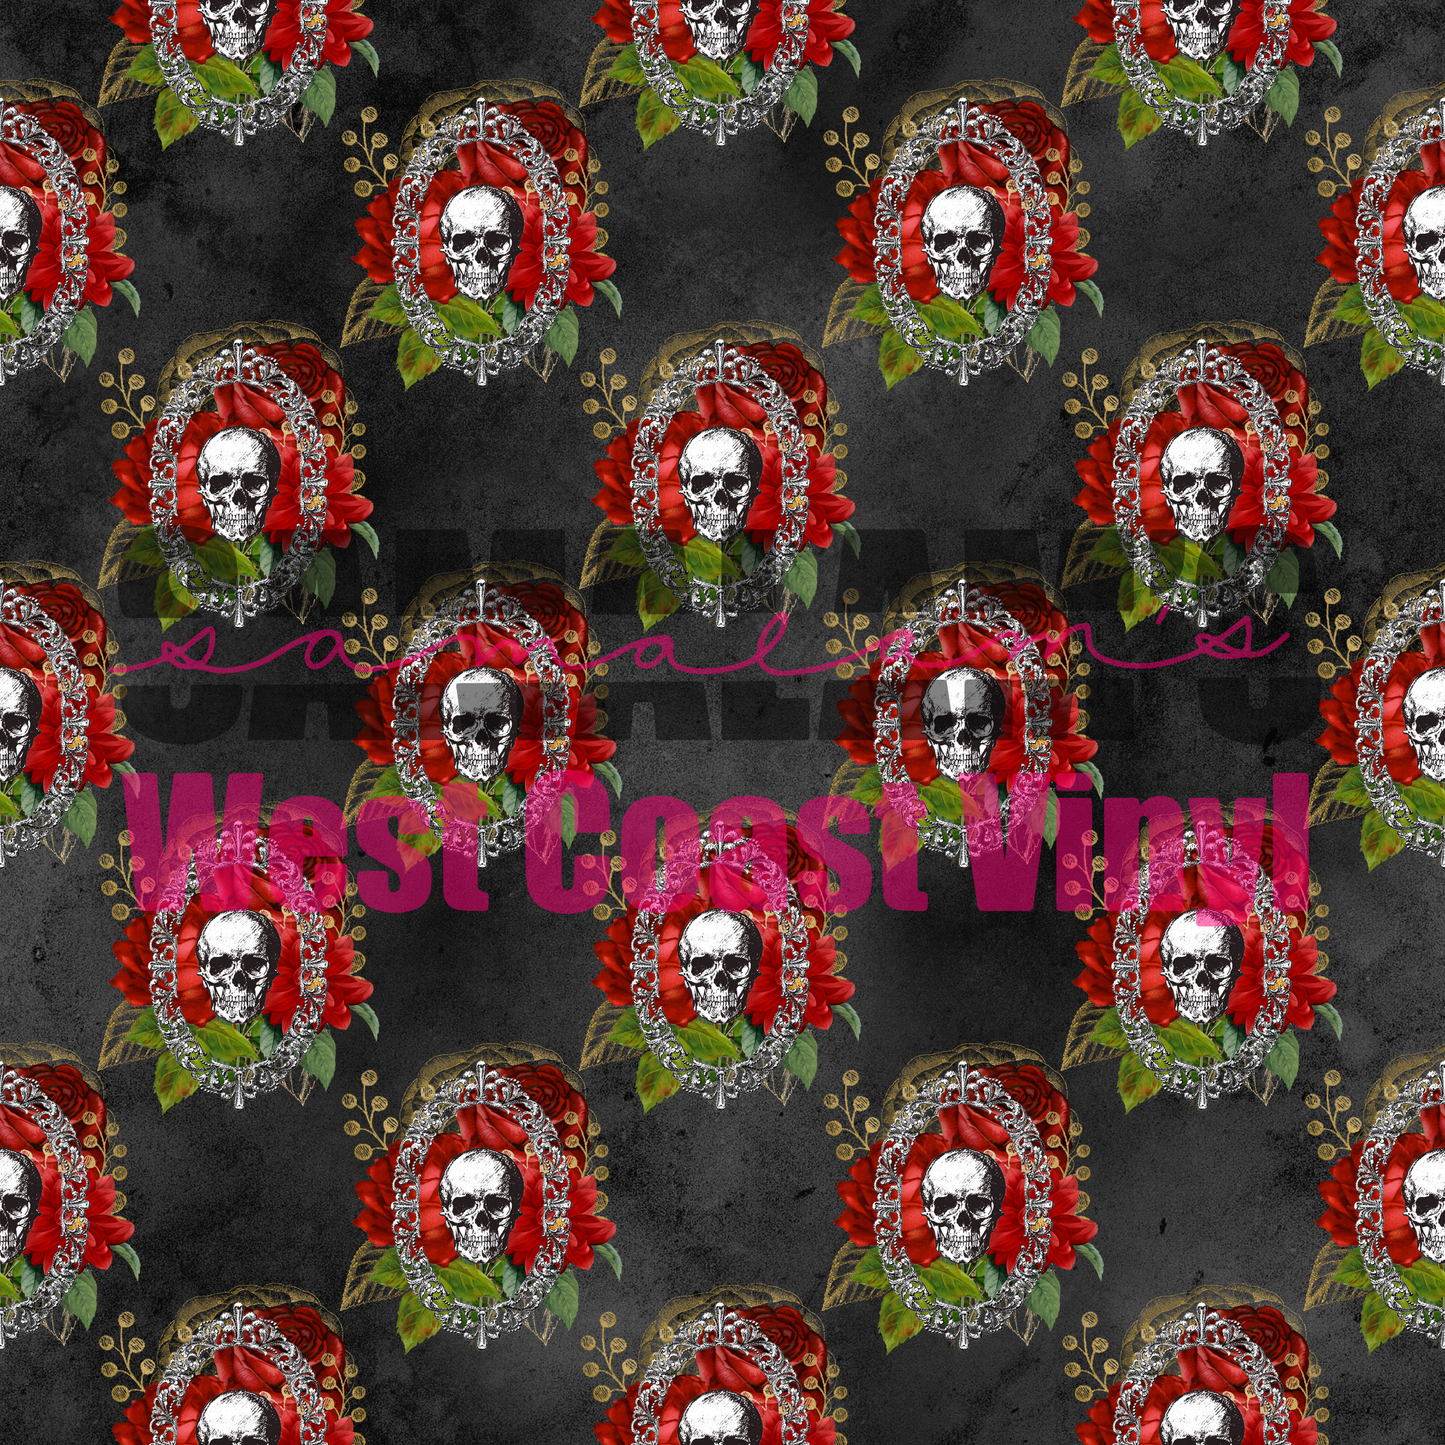 Gothic Christmas (Seamless) - Pack 1